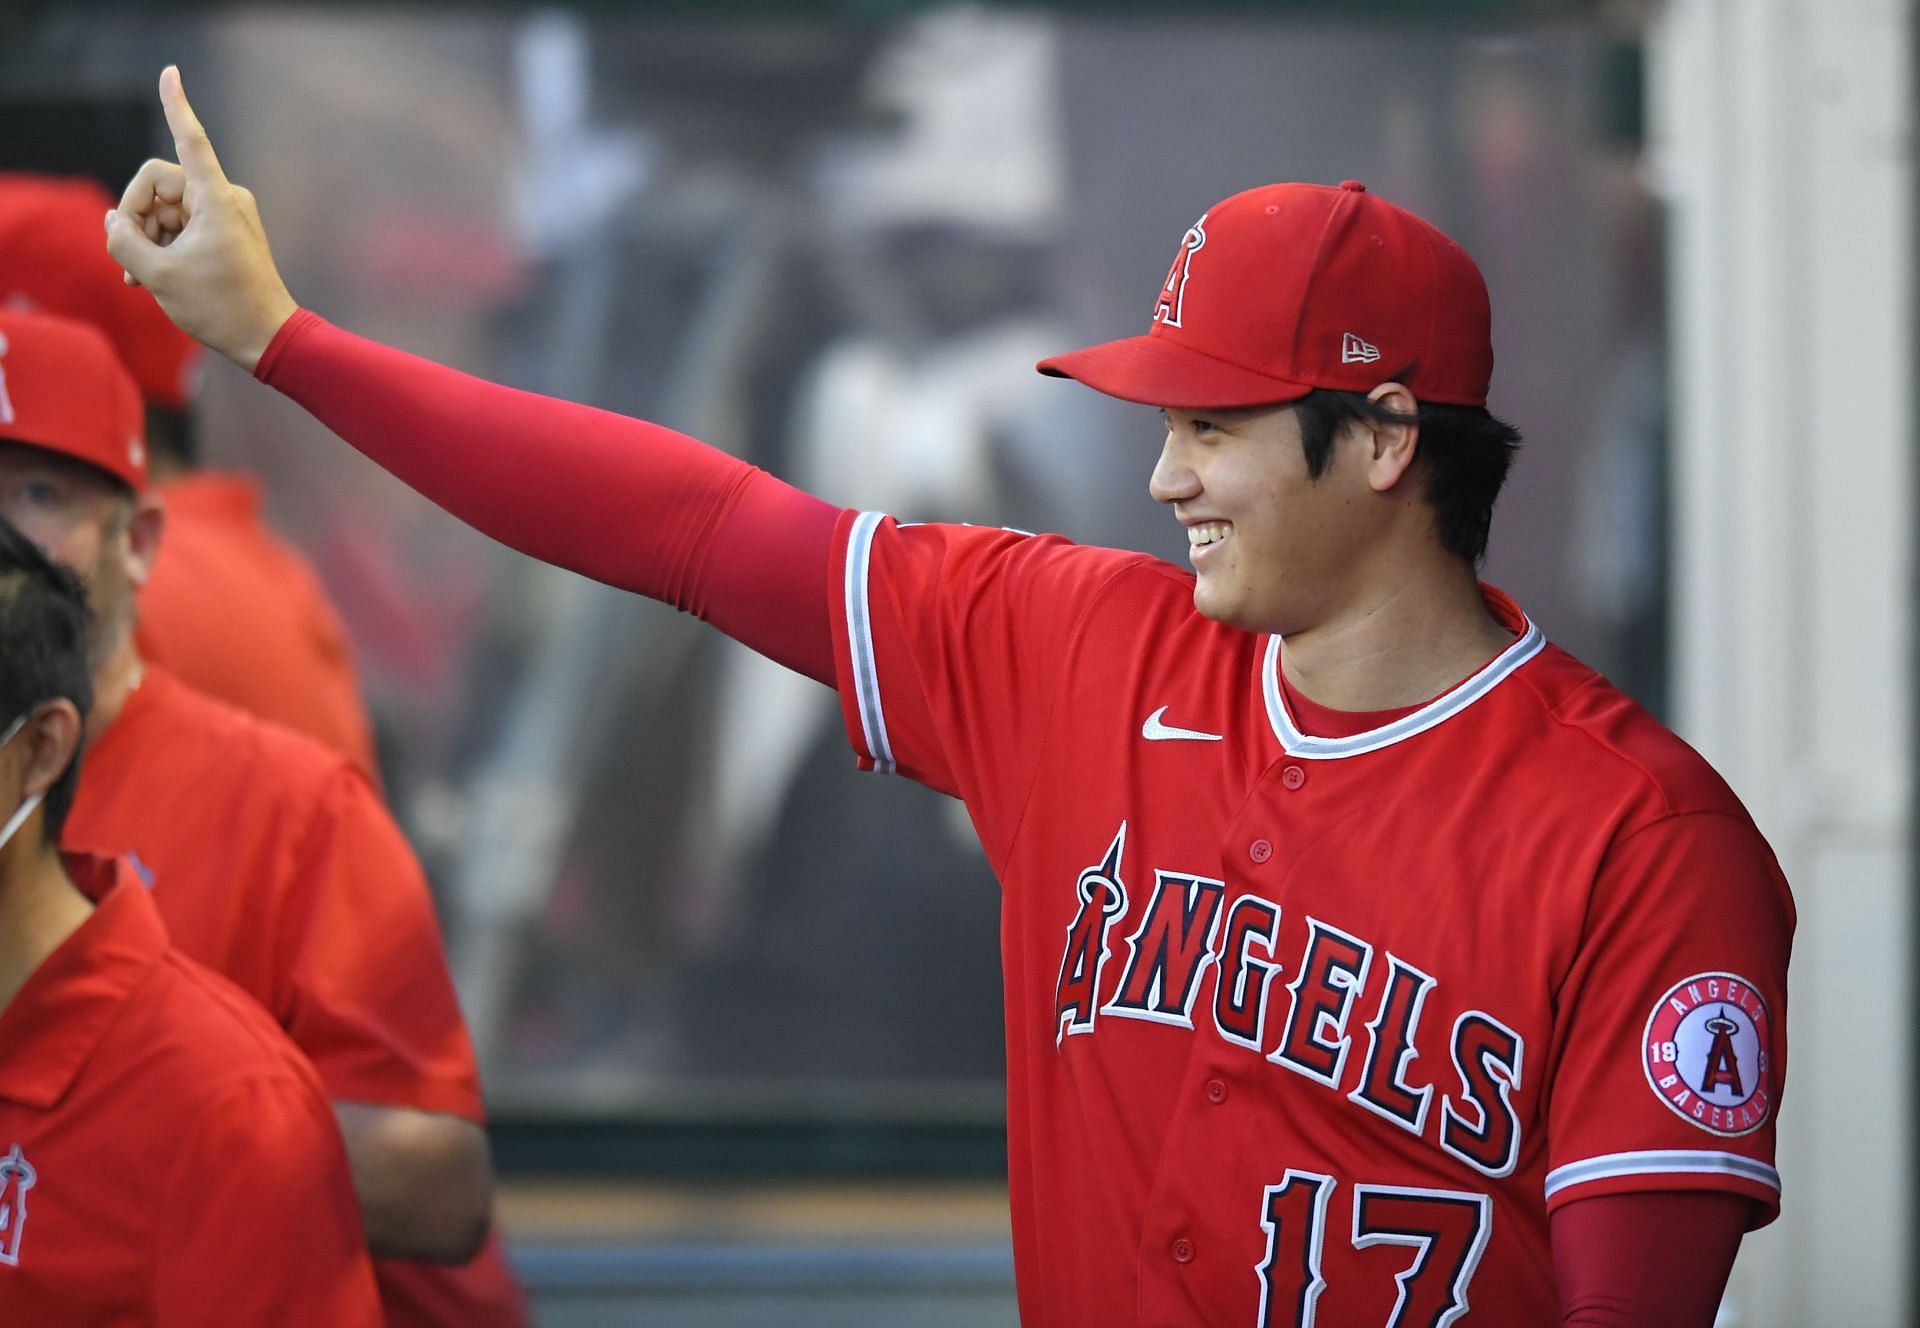 Ohtani has gotten off to a slow start at the plate but fans should not be worried as he plays his sixth game of the year tonight